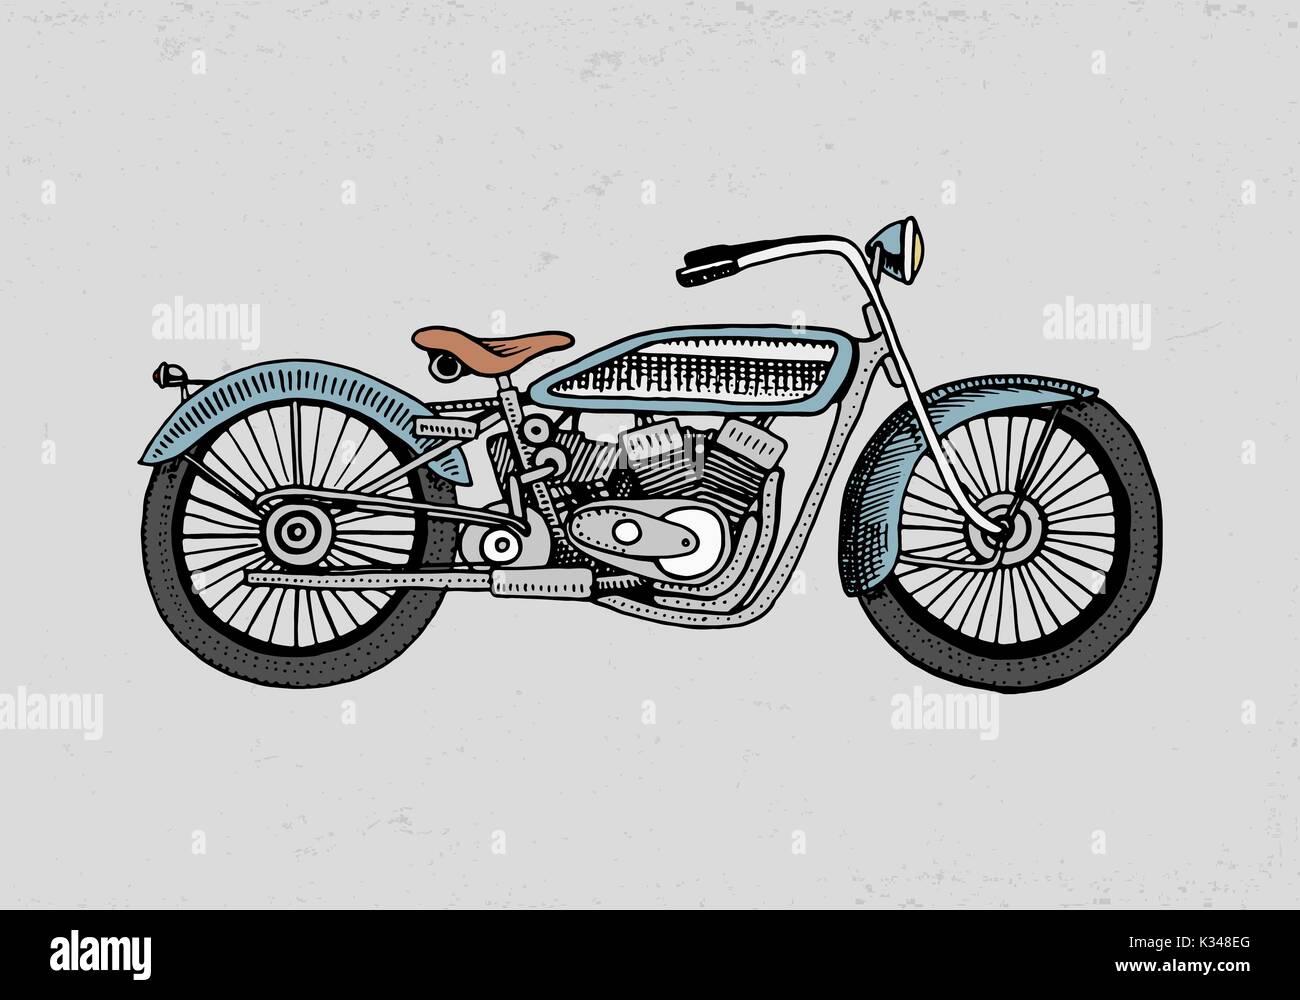 Motorbike Drawing Techniques on Behance